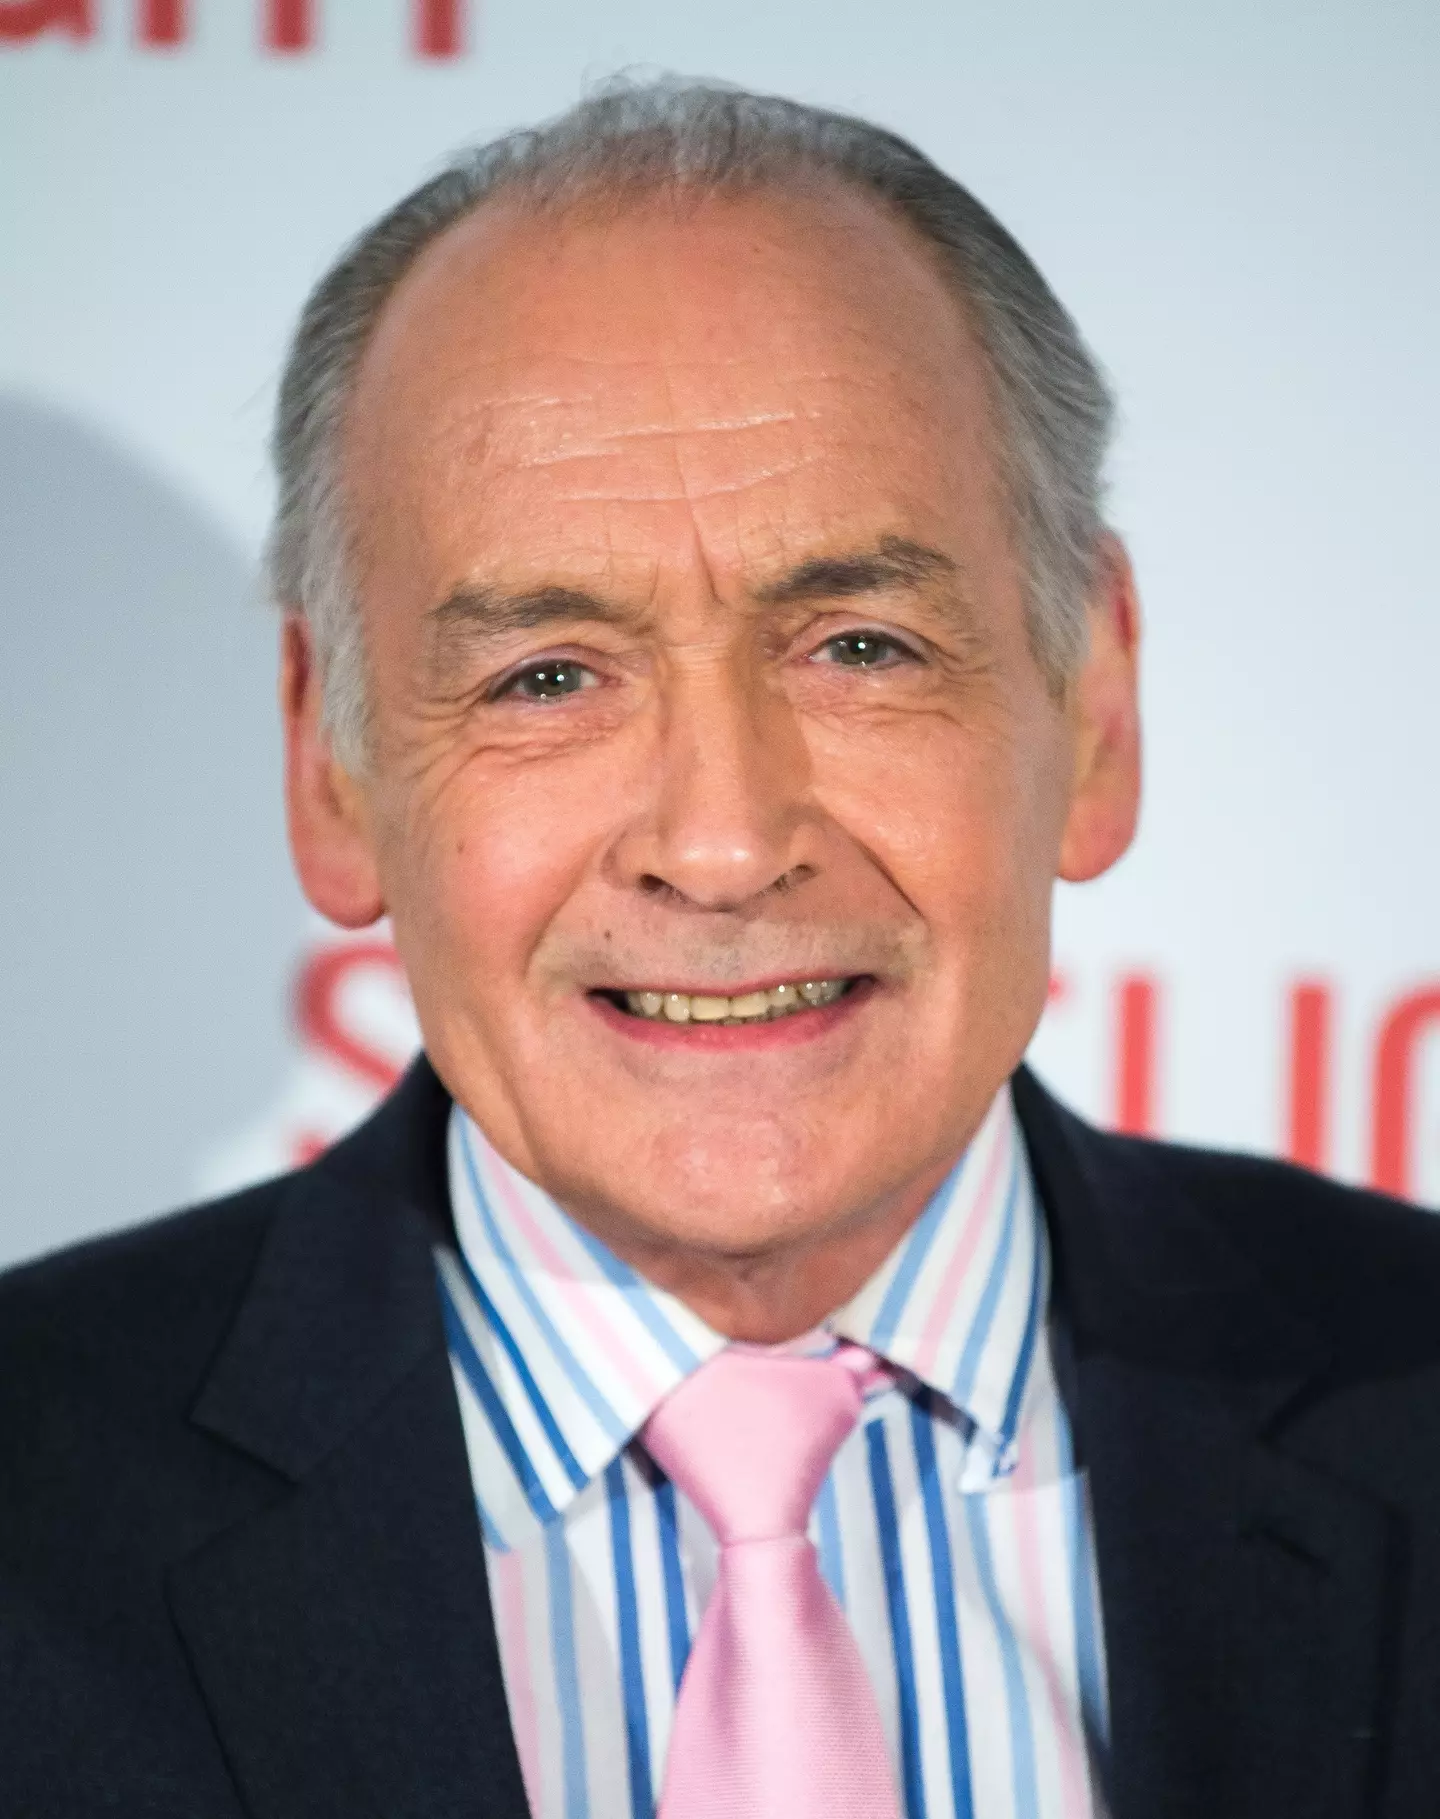 Alastair Stewart has been diagnosed with dementia.